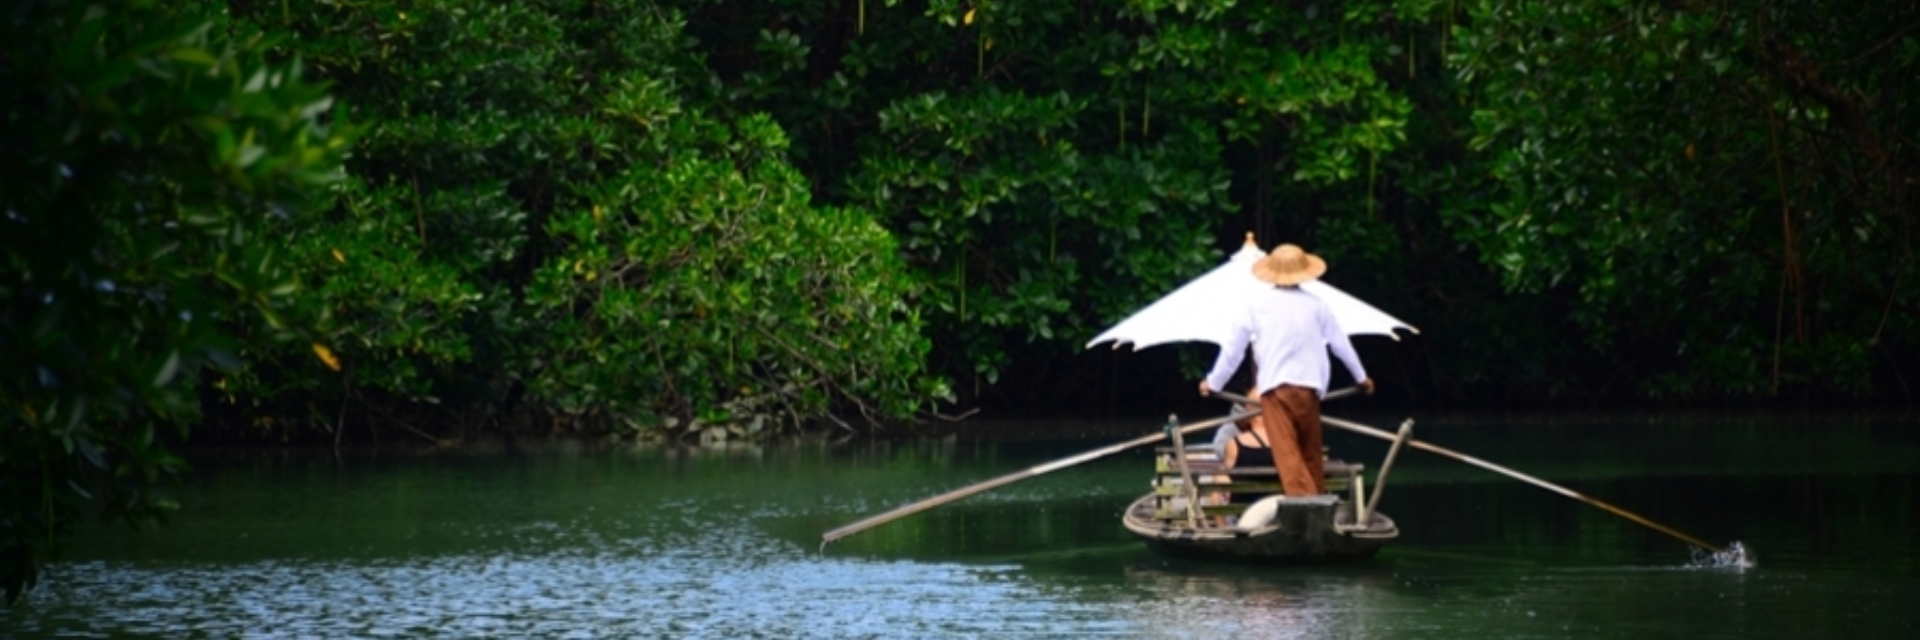 CRUISE IN STYLE ON KOH CHANG’S GONDOLA